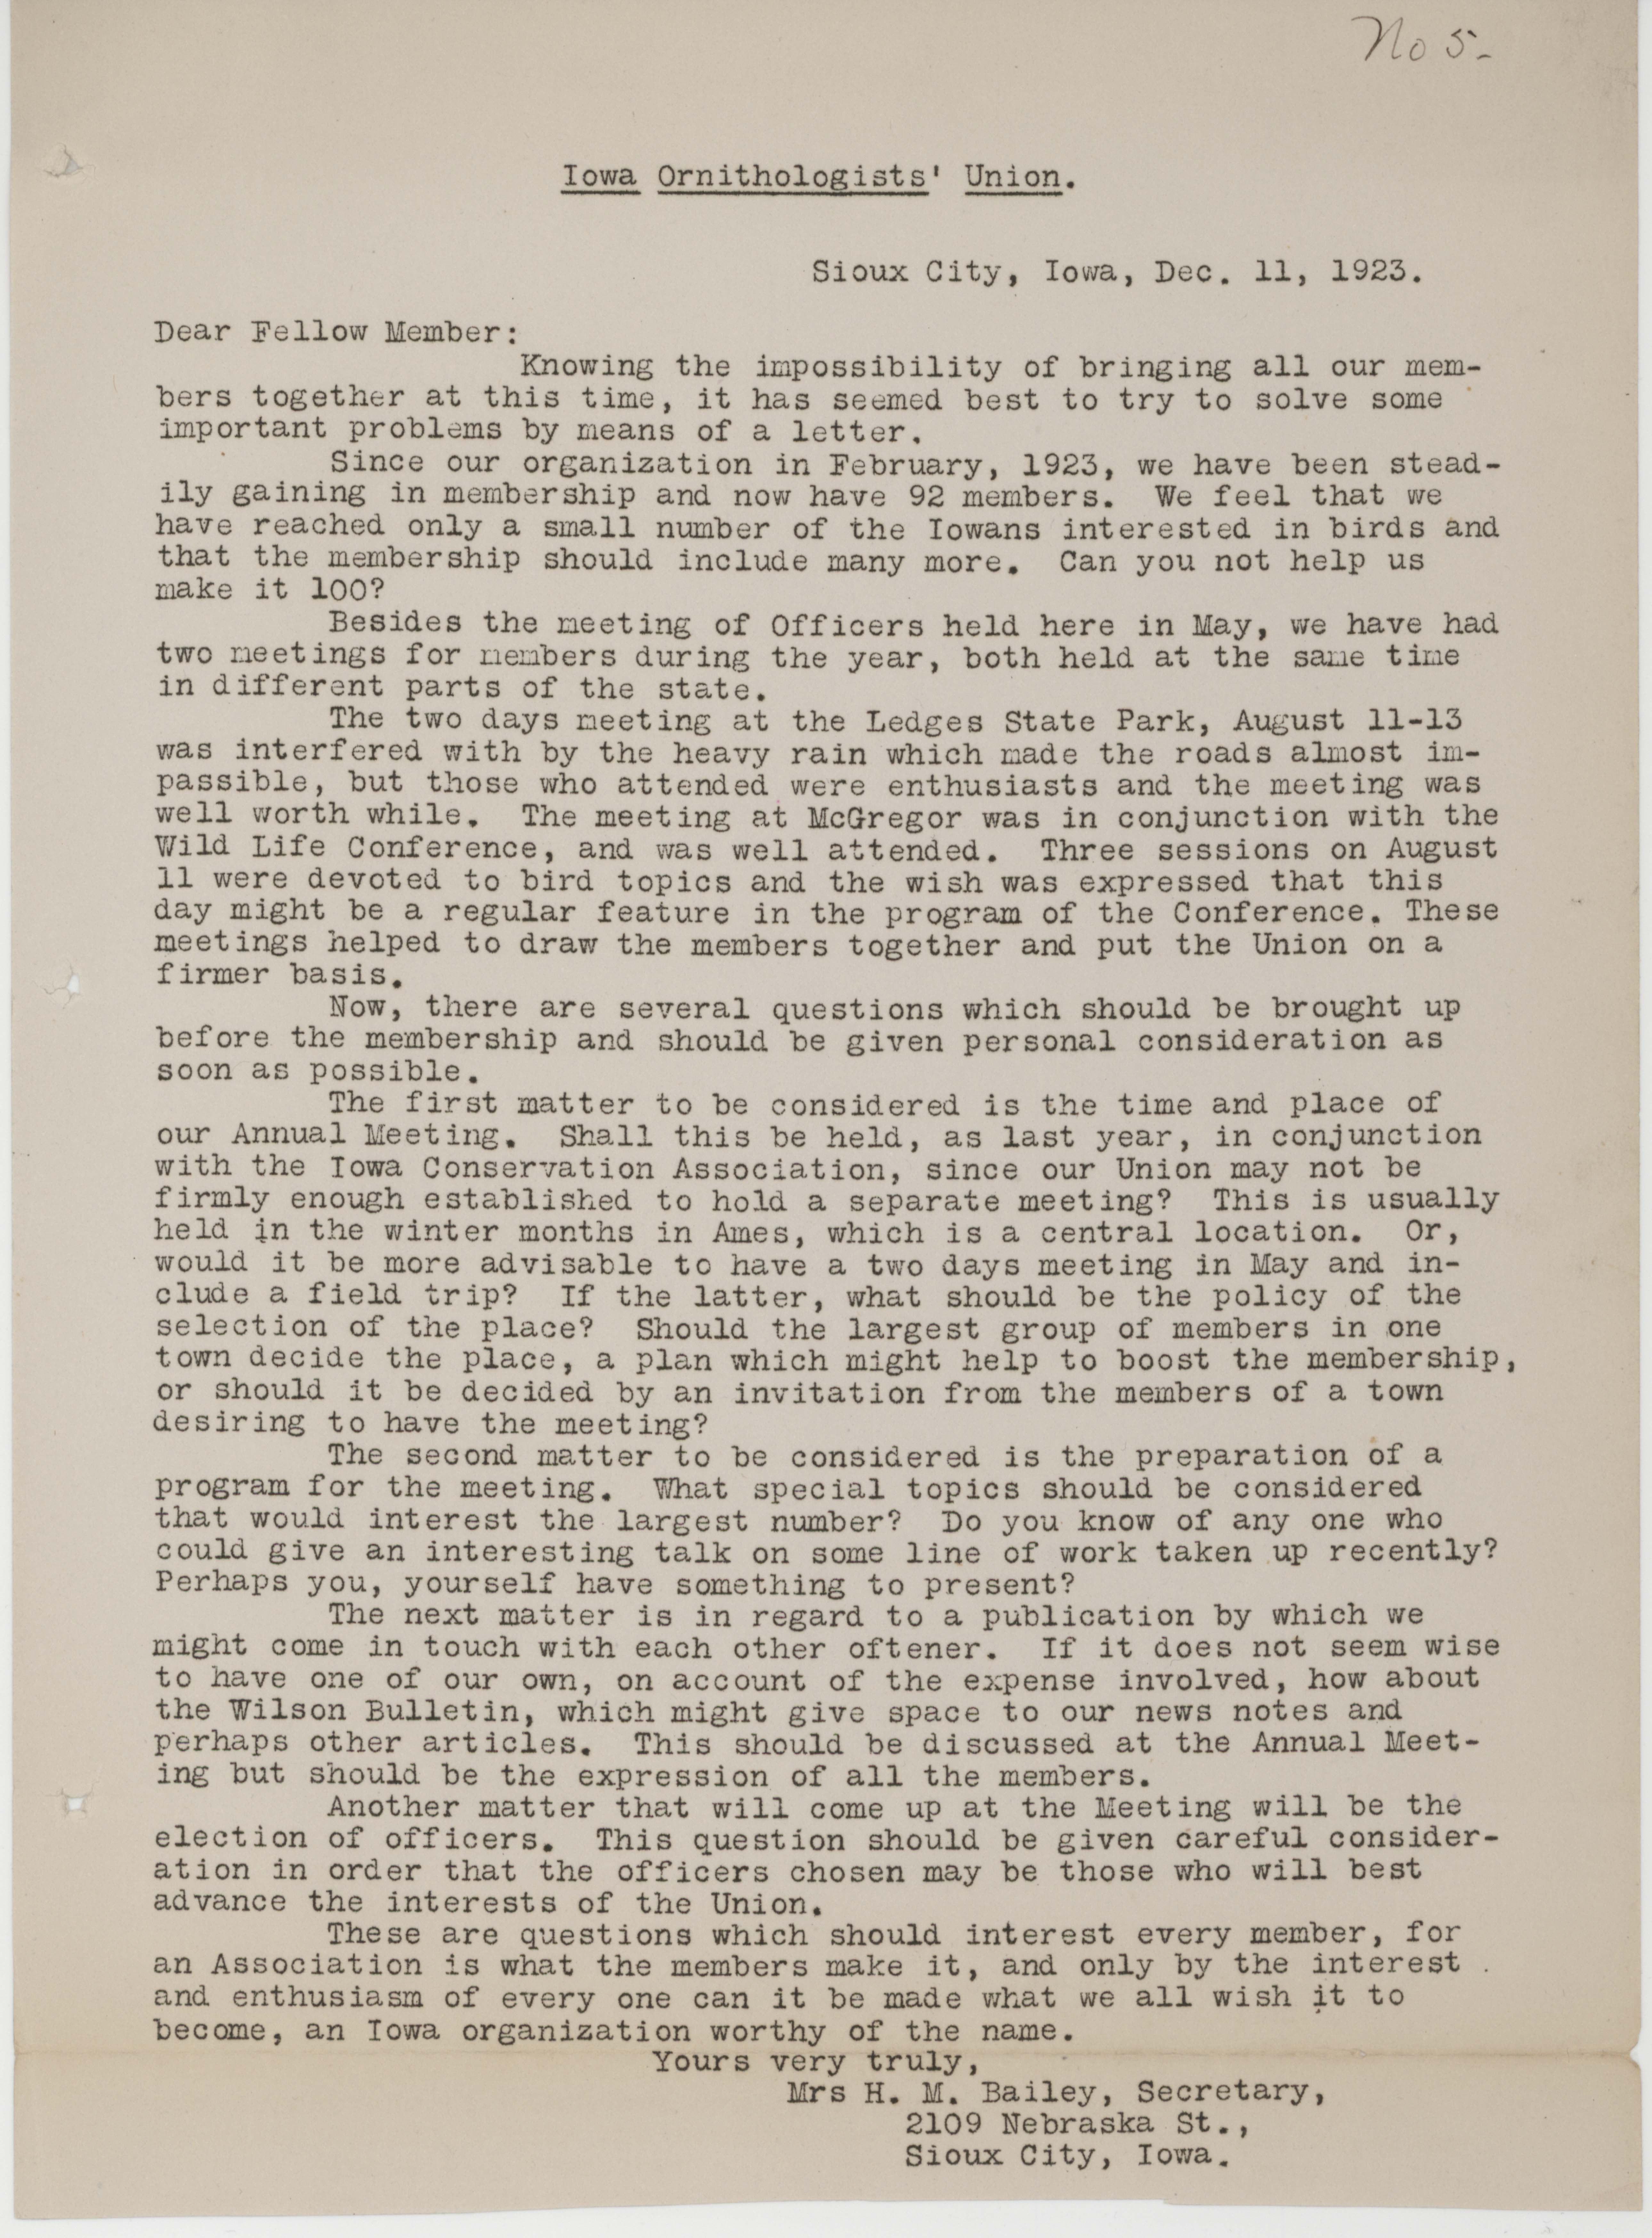 Letter to members of the Iowa Ornithologists' Union regarding the annual meeting, December 11, 1923